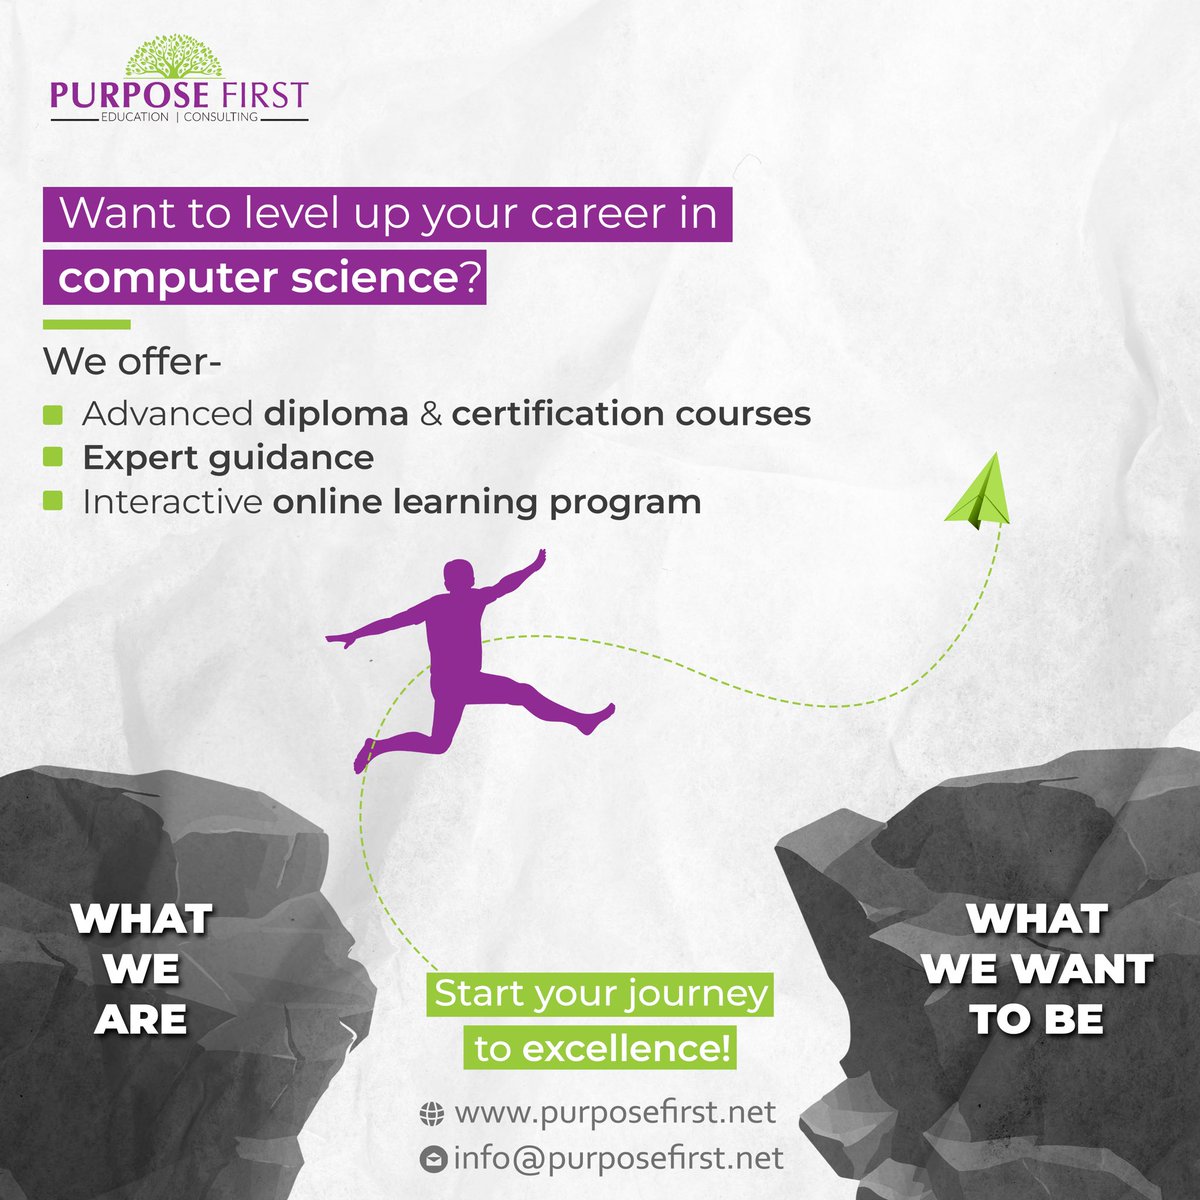 Elevate your tech career with our SQA certified advanced diploma in software development and computer science. Whether beginner or pro, take the leap now! #TechCareerLeap

#purposefirst #upskilling #highereducation #organisationdevelopment #consultancy #upskilling